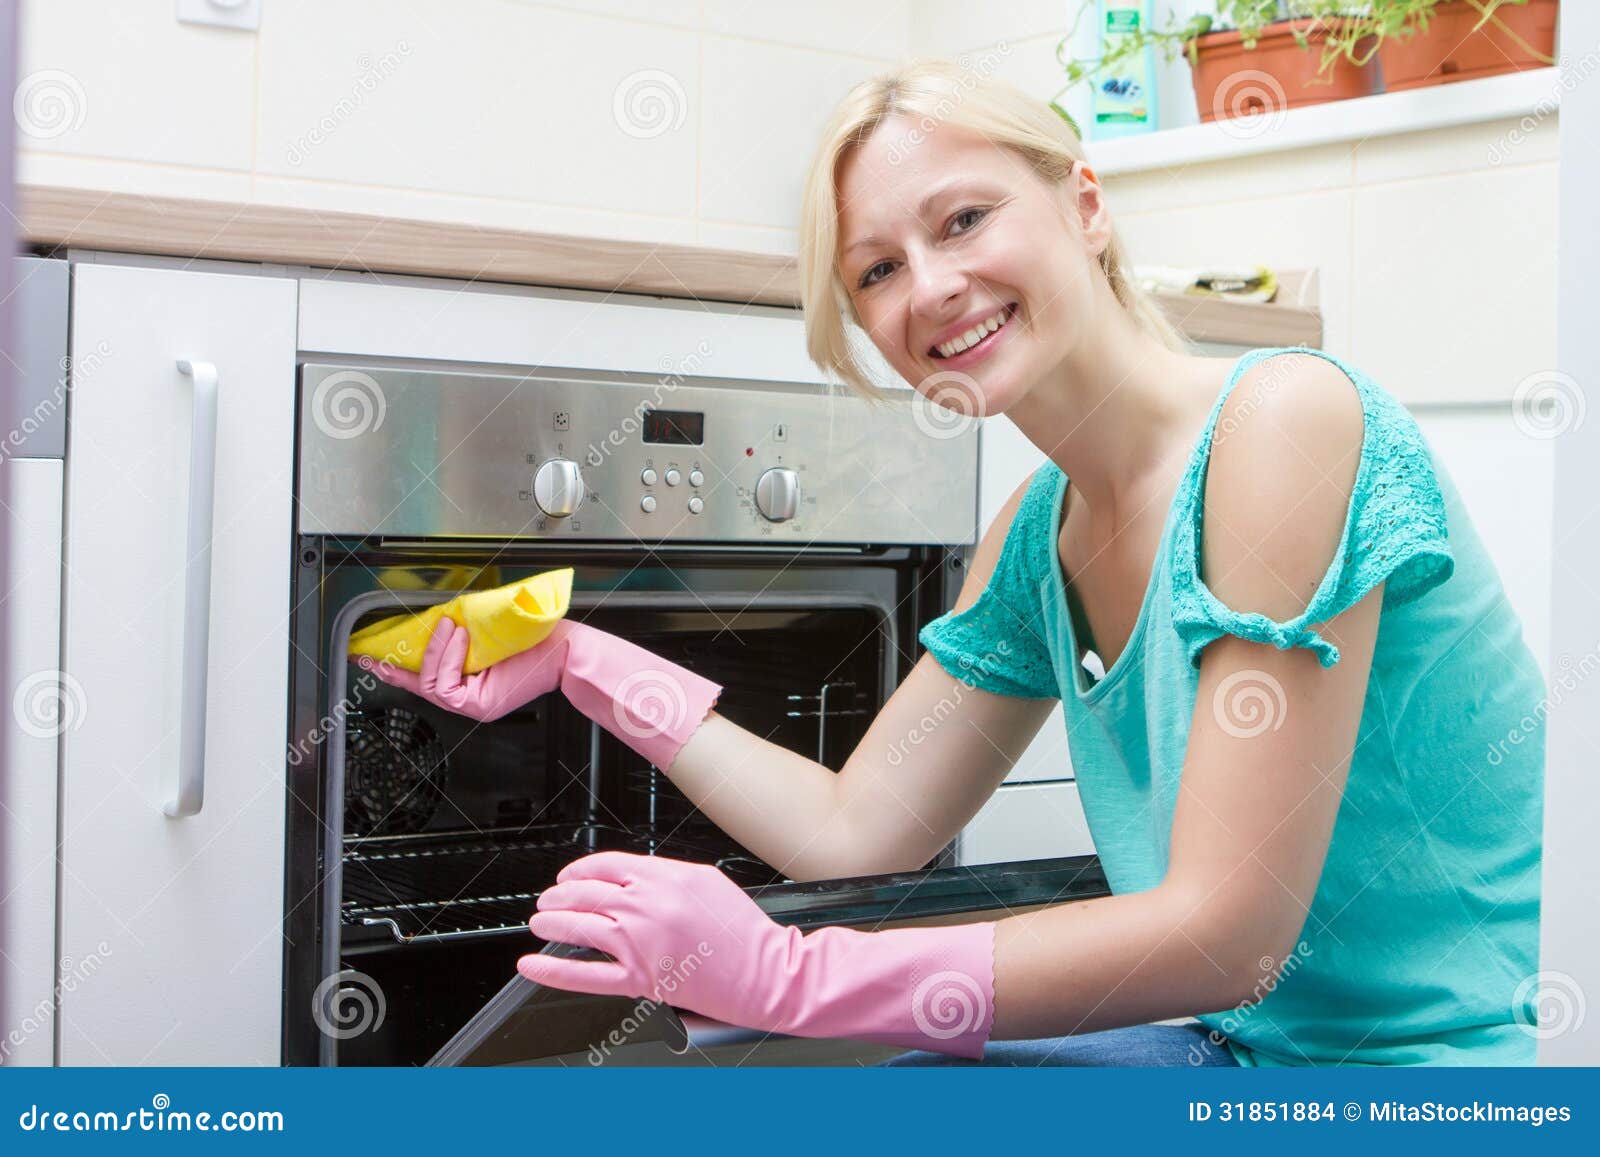 Happy Housewife Cleaning Stock Images Image 31851884